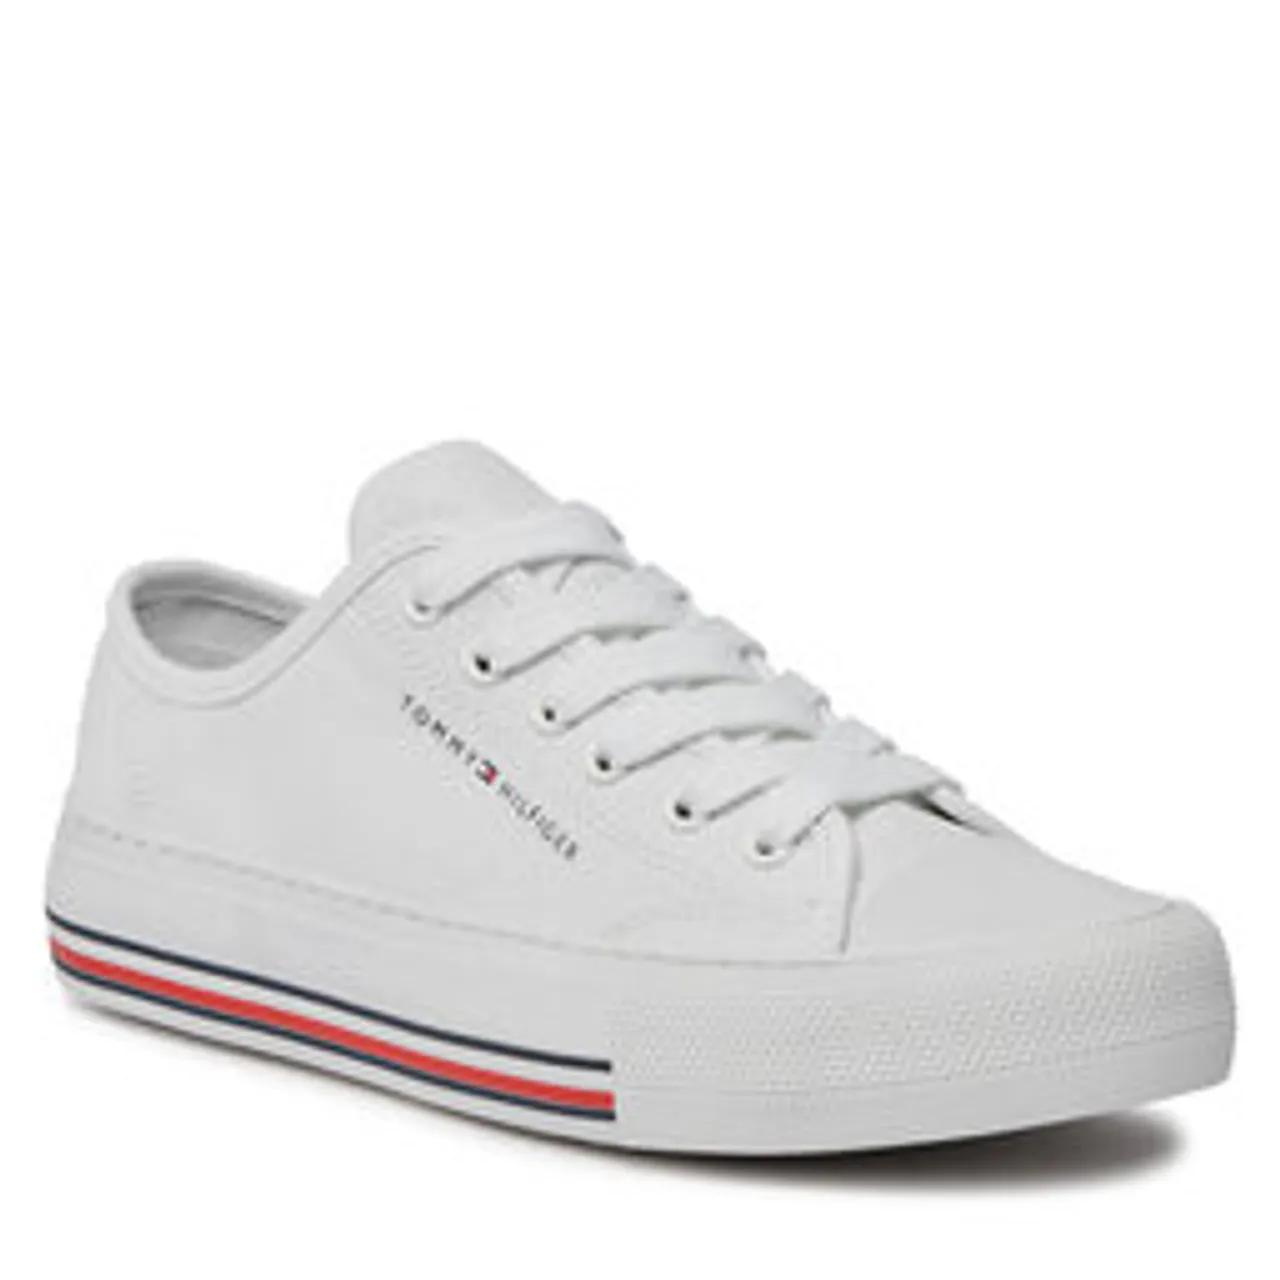 Sneakers aus Stoff Tommy Hilfiger Low Cut Lace-Up Sneaker T3A9-33185-1687 S White 100